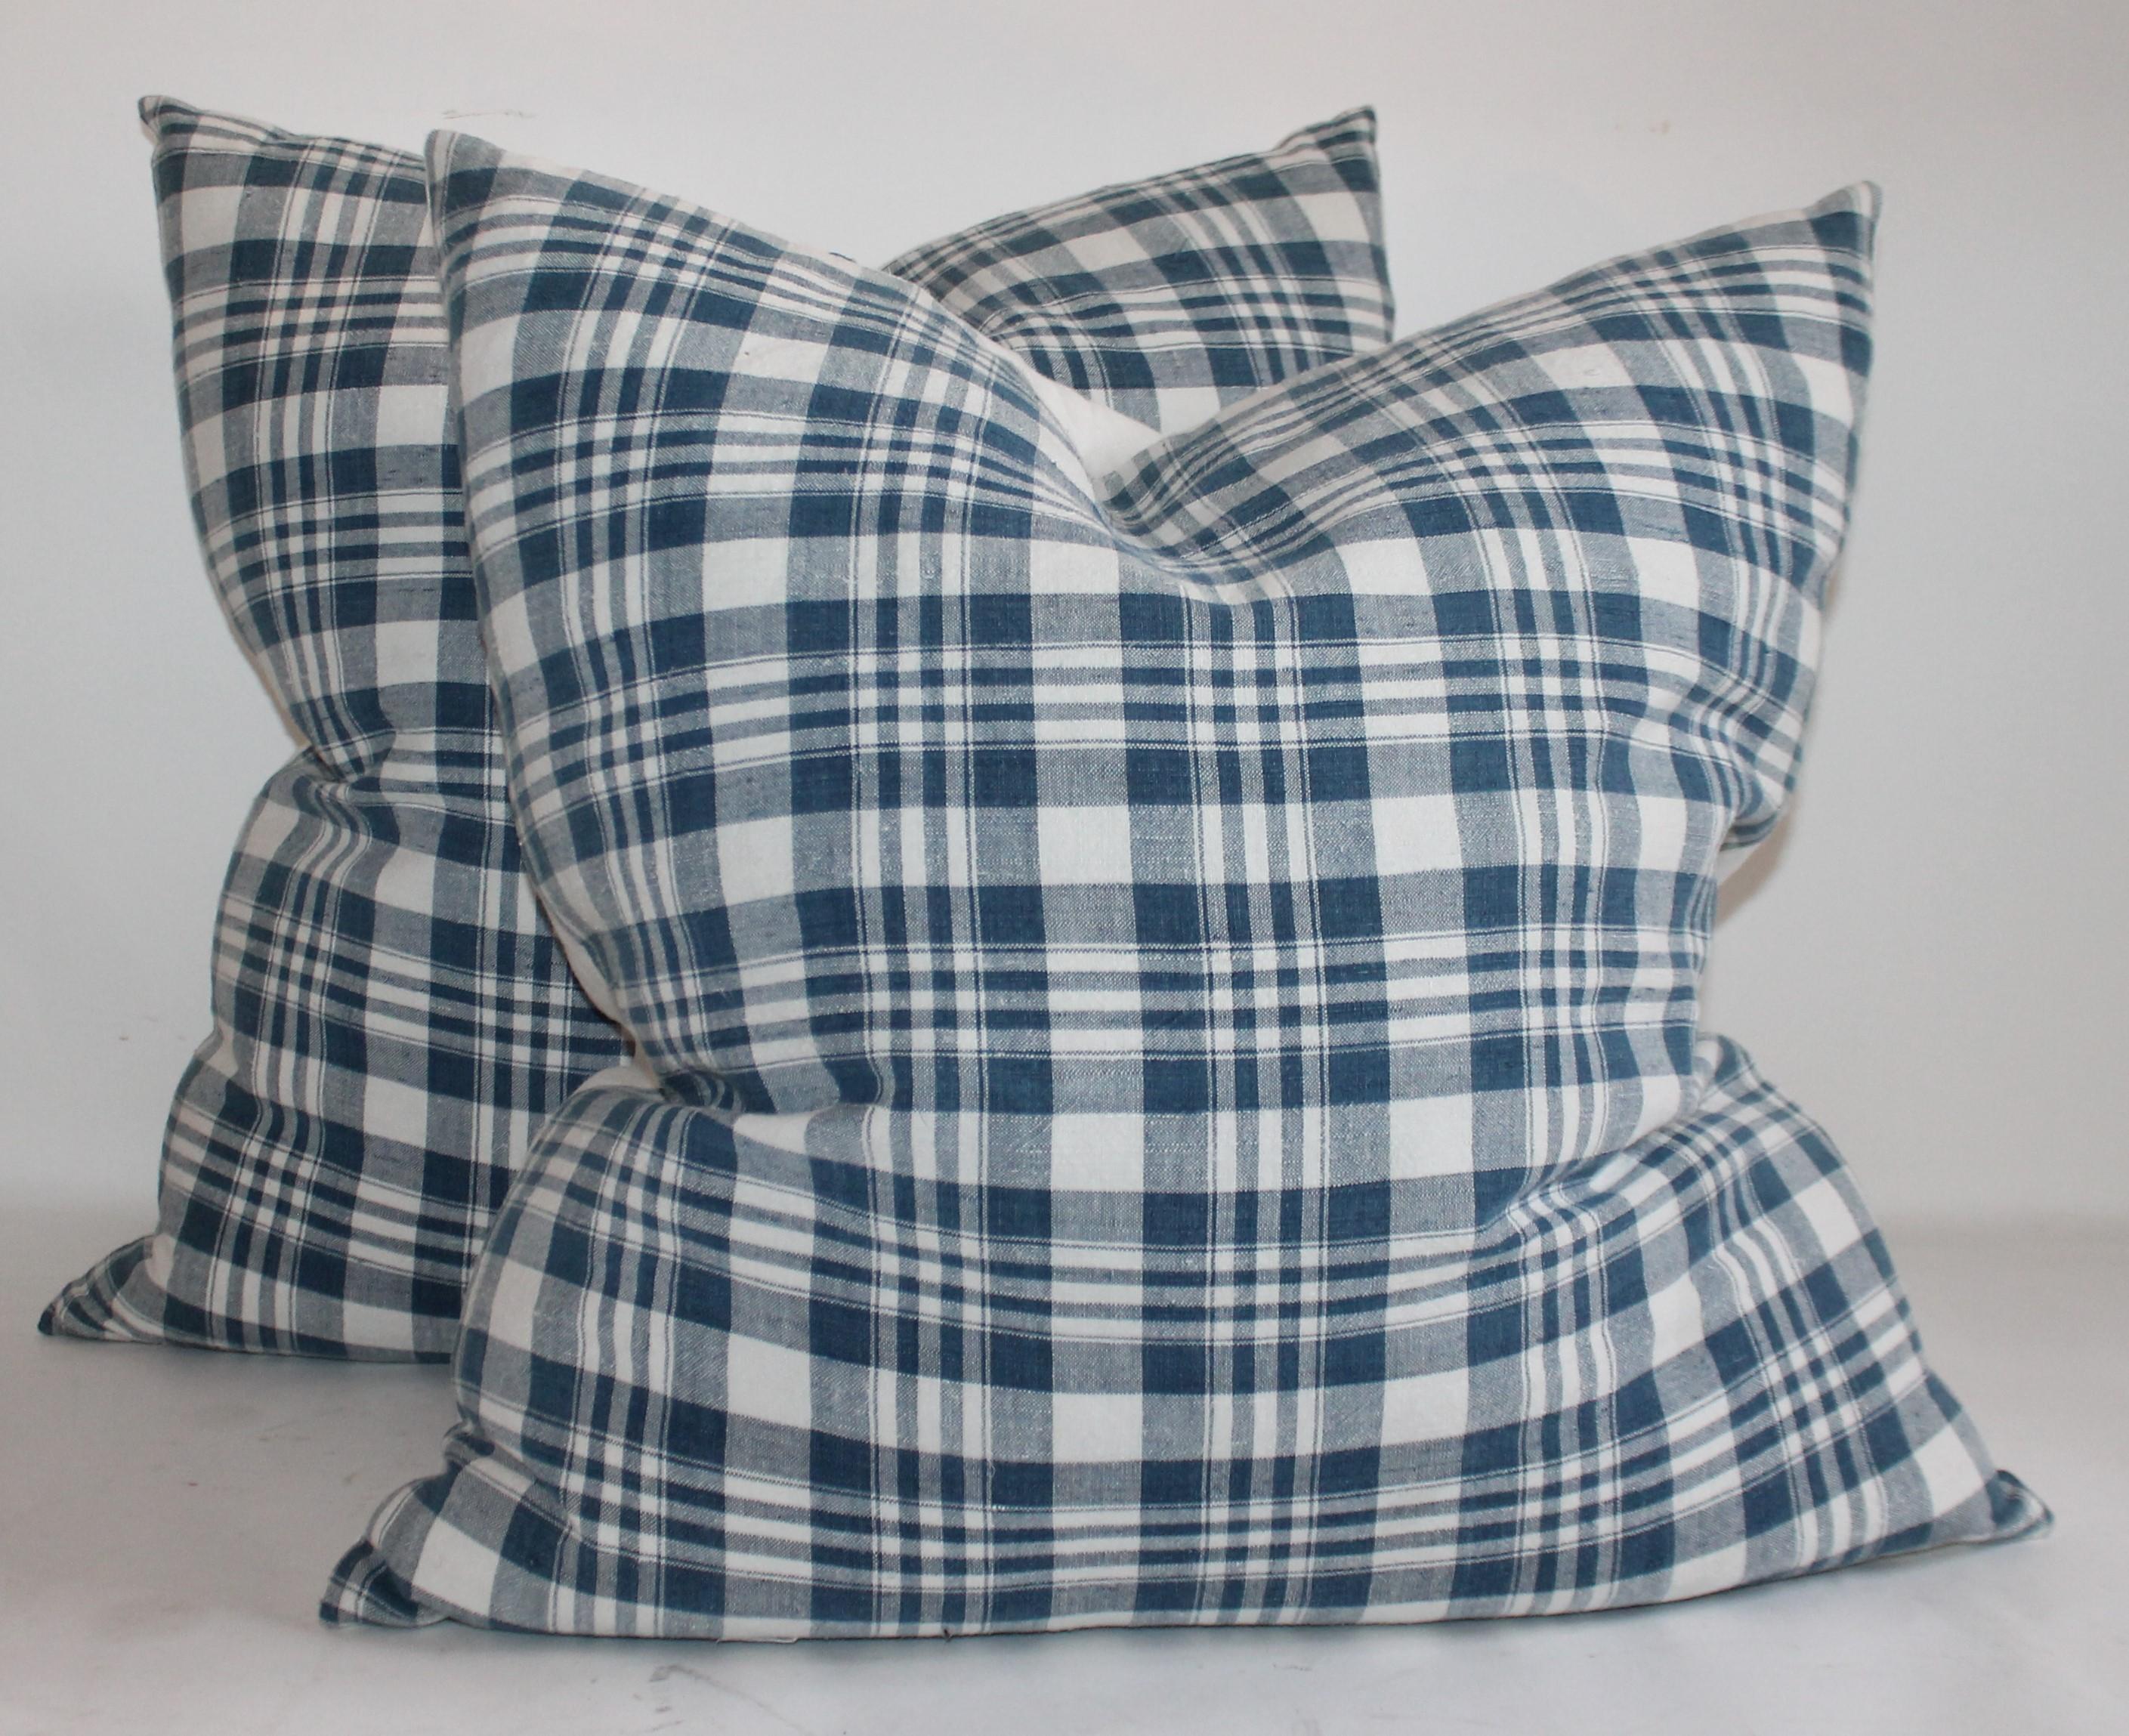 Muted Blue & White Homespun Linen Pillows, Collection of Four Pillows In Good Condition For Sale In Los Angeles, CA